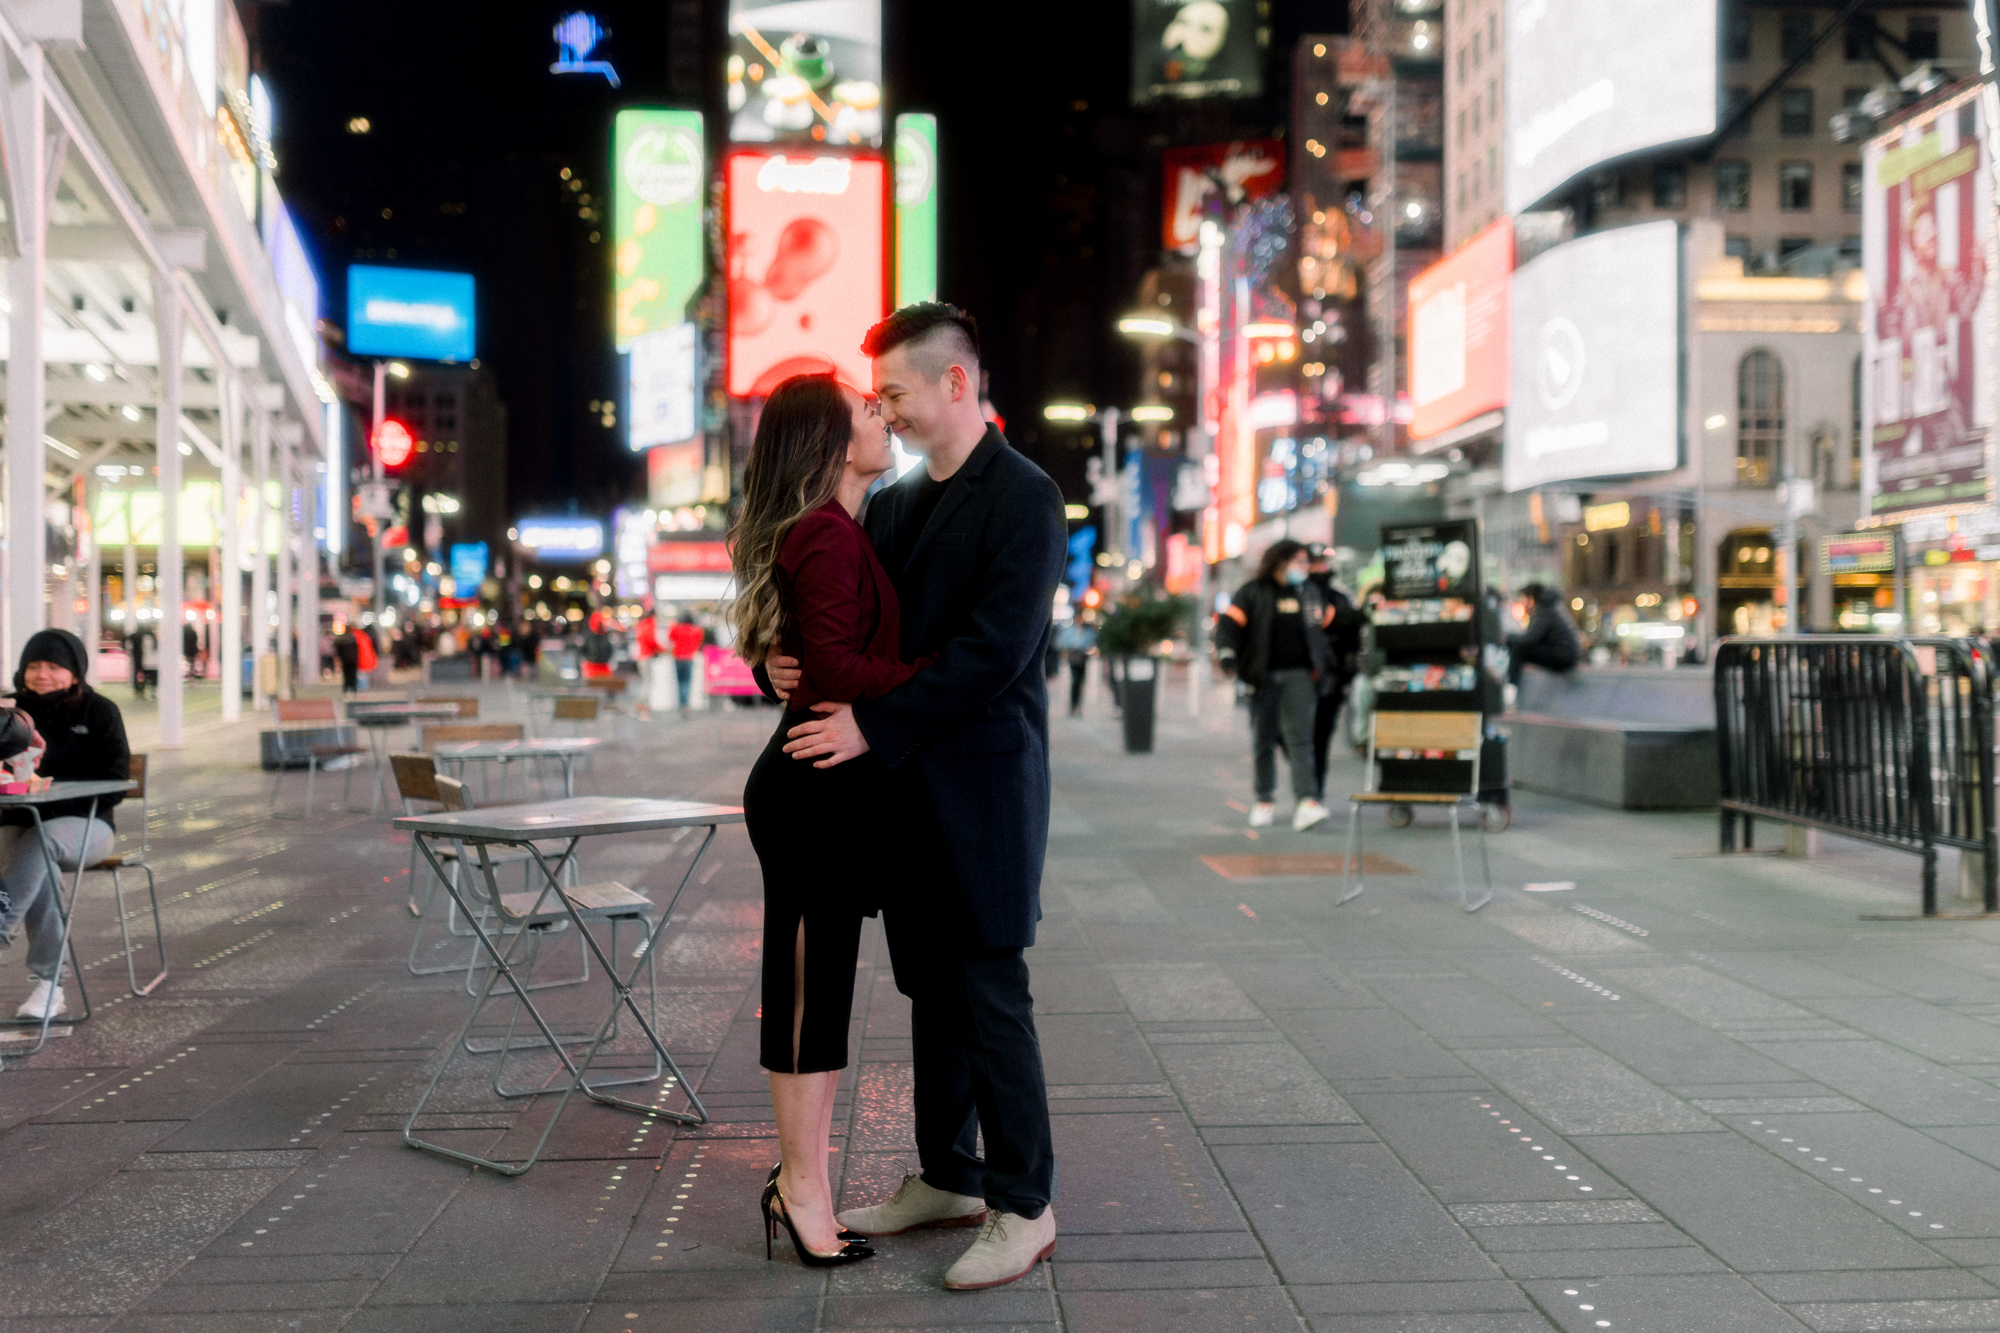 Magical Nighttime Winter Engagement Photos in New York's Iconic Times Square